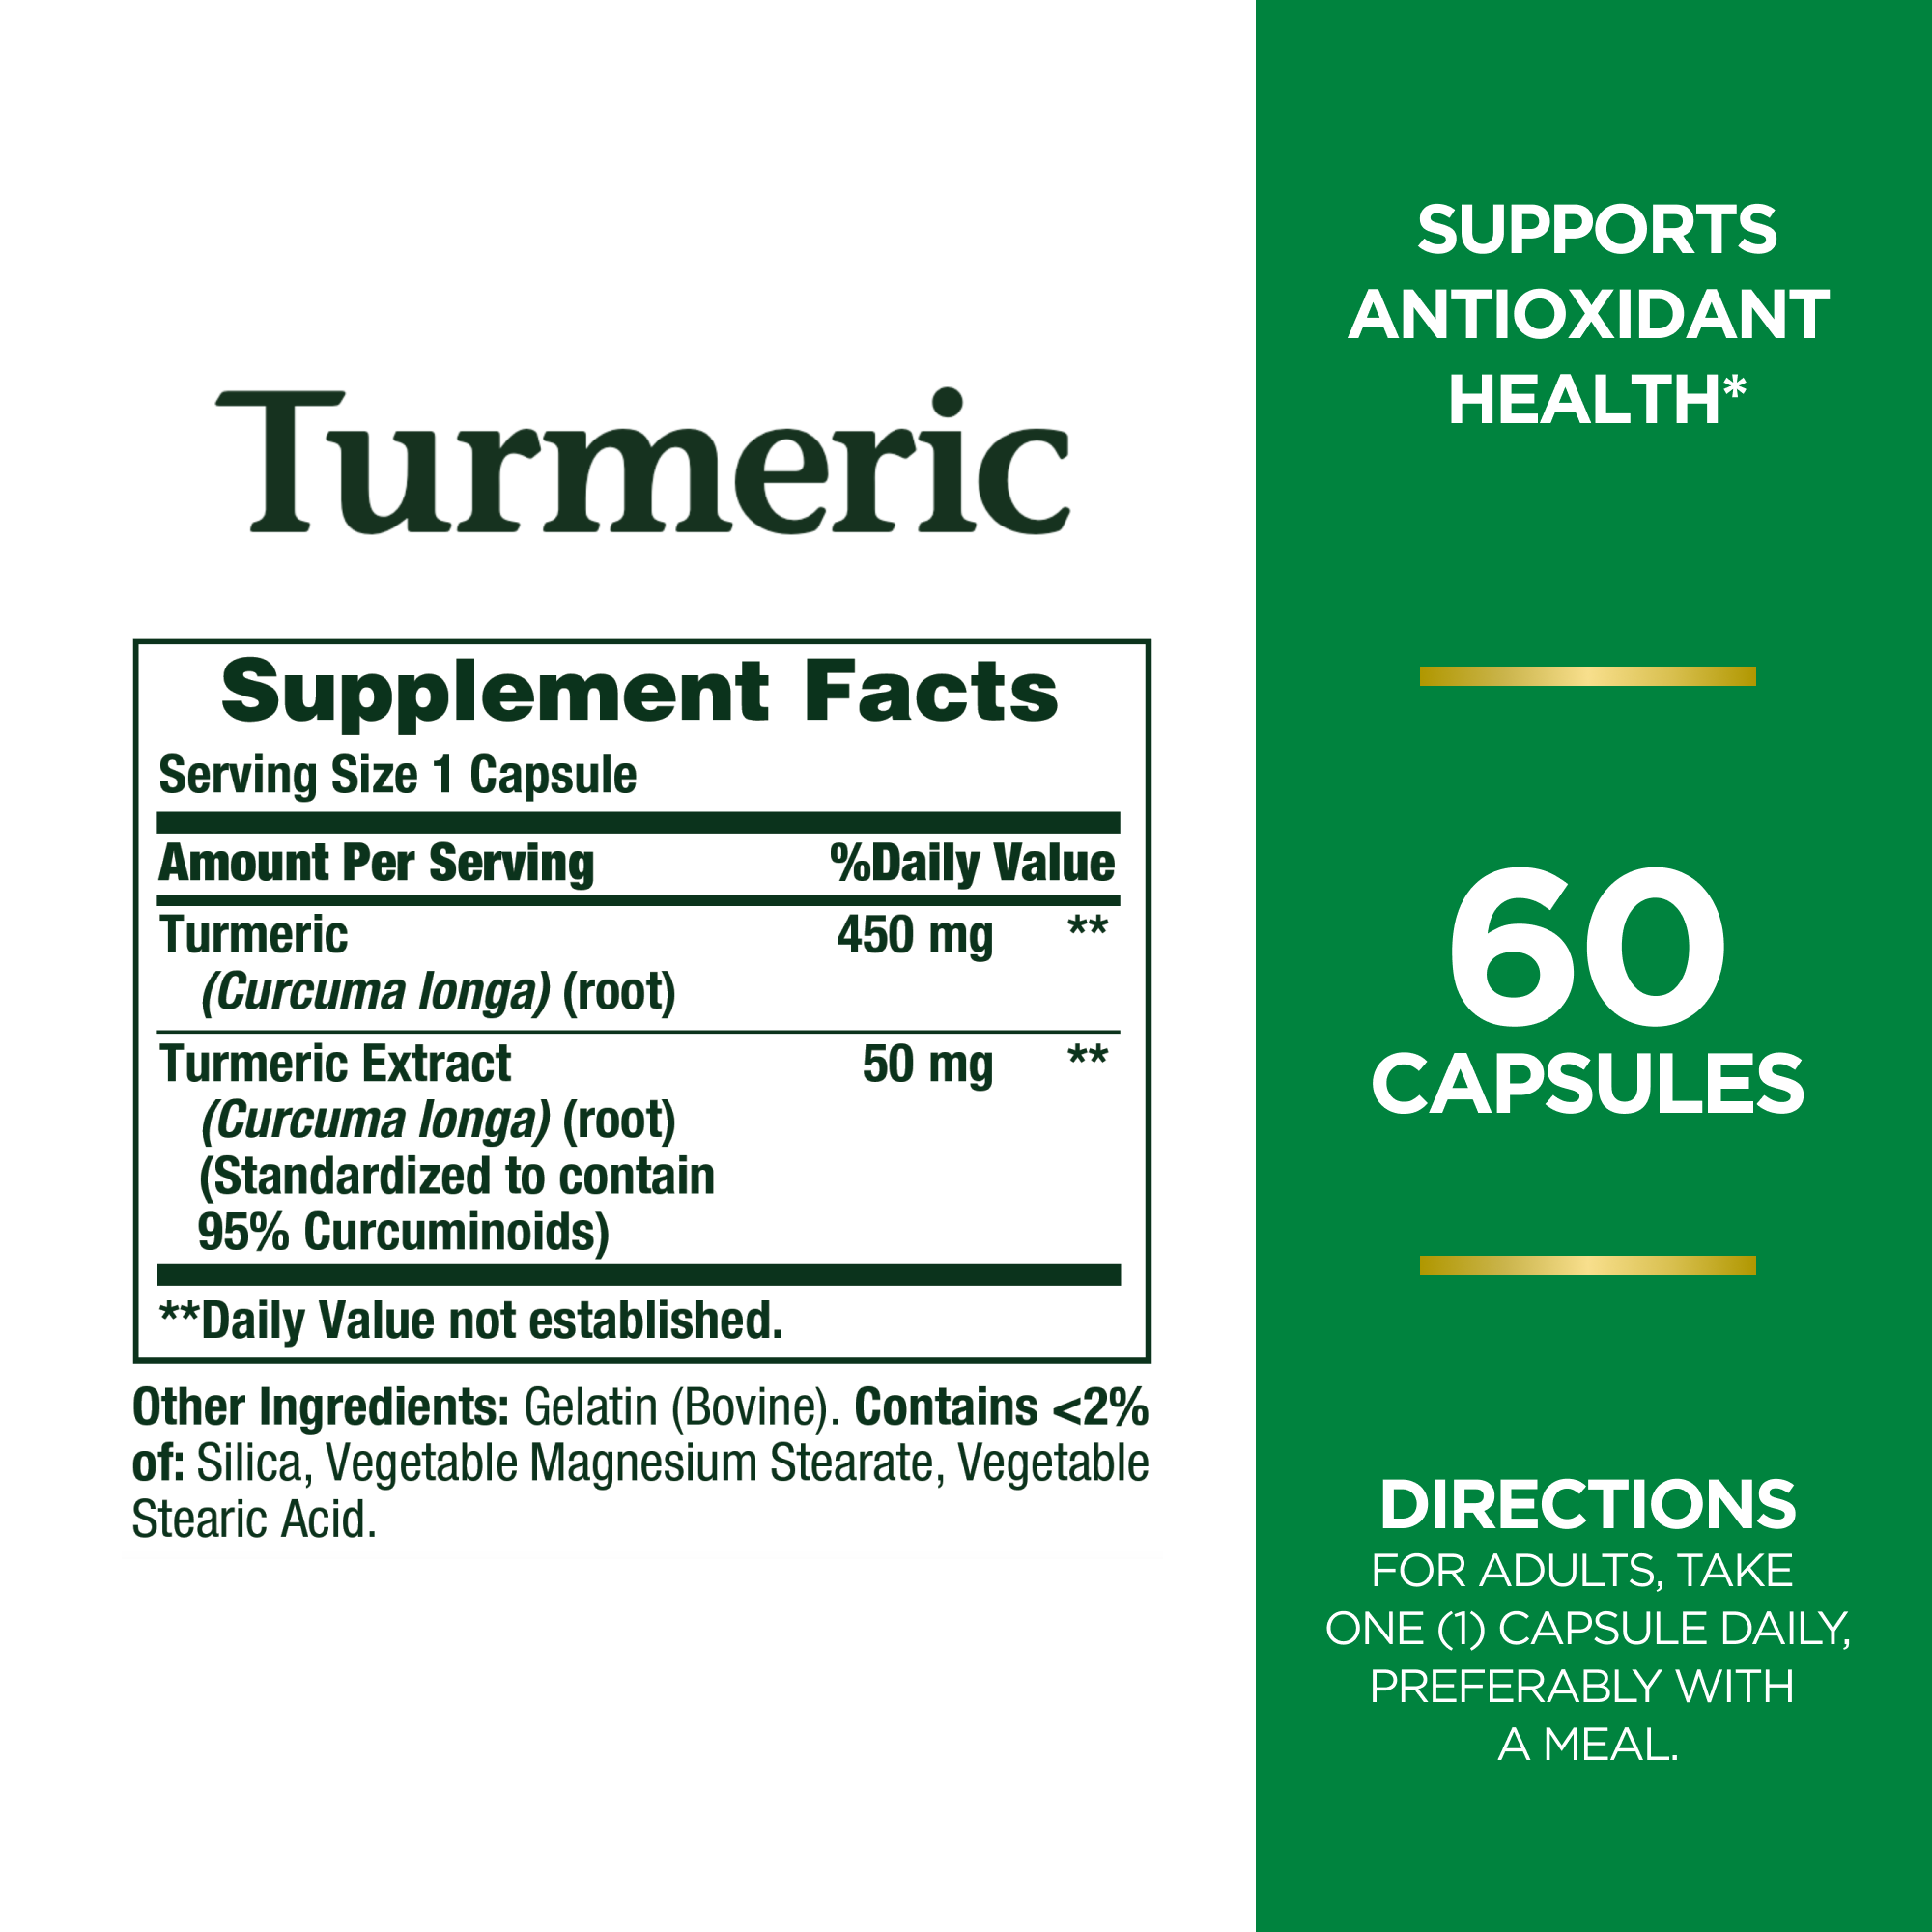 Nature's Bounty Turmeric 450 mg Capsules for Antioxidant Health, 60 Ct - image 5 of 5